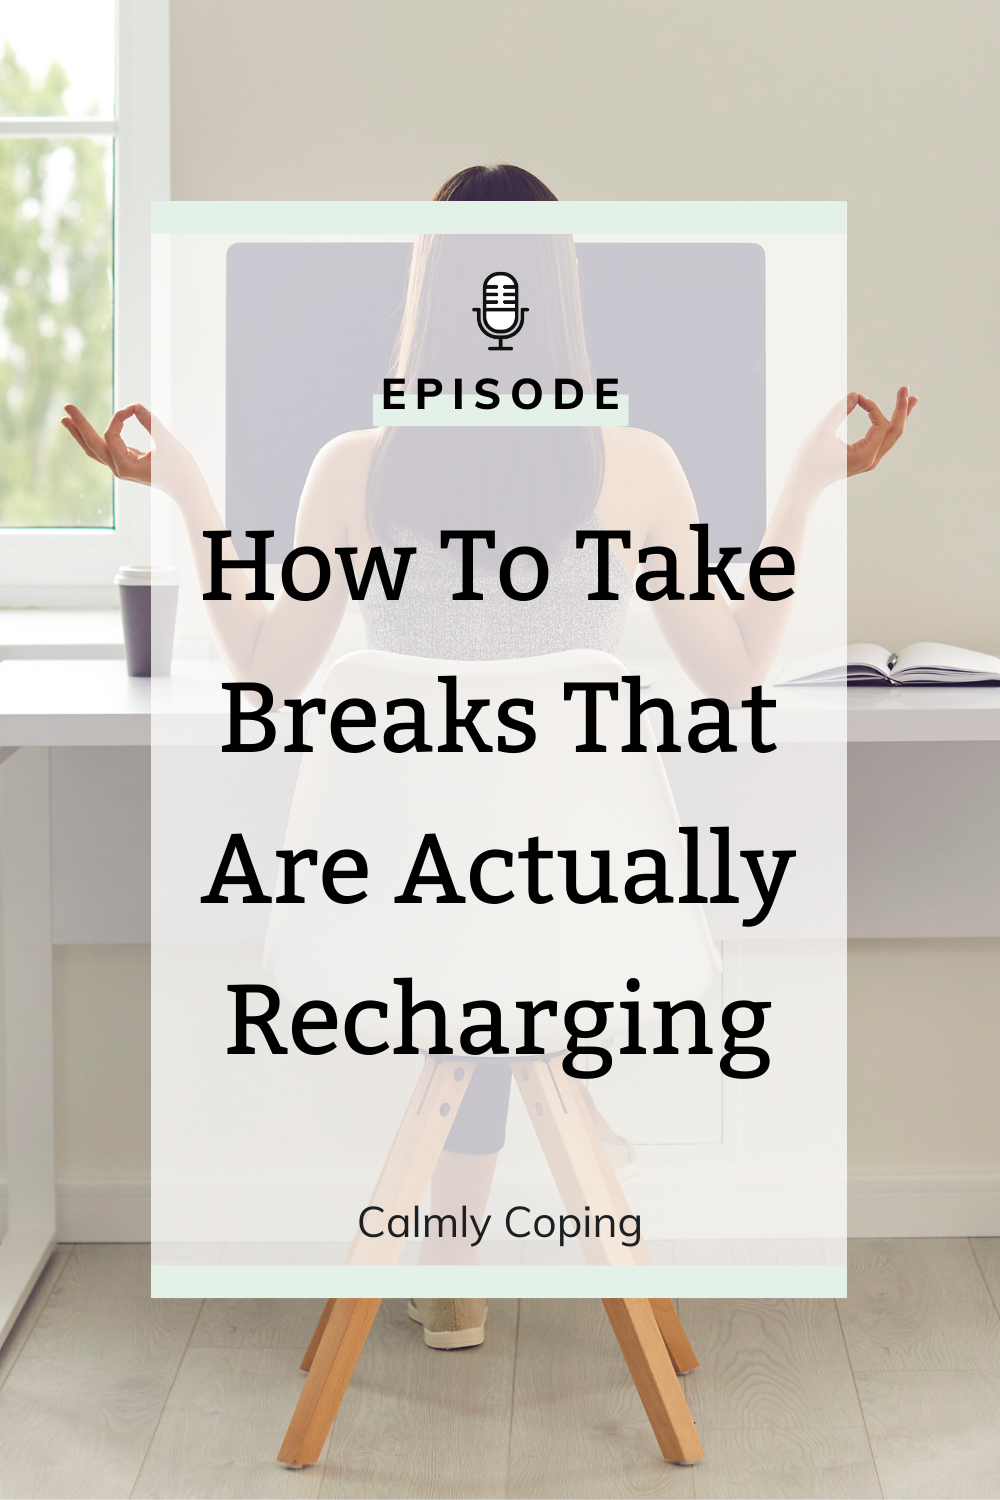 How To Take Breaks That Are Actually Recharging